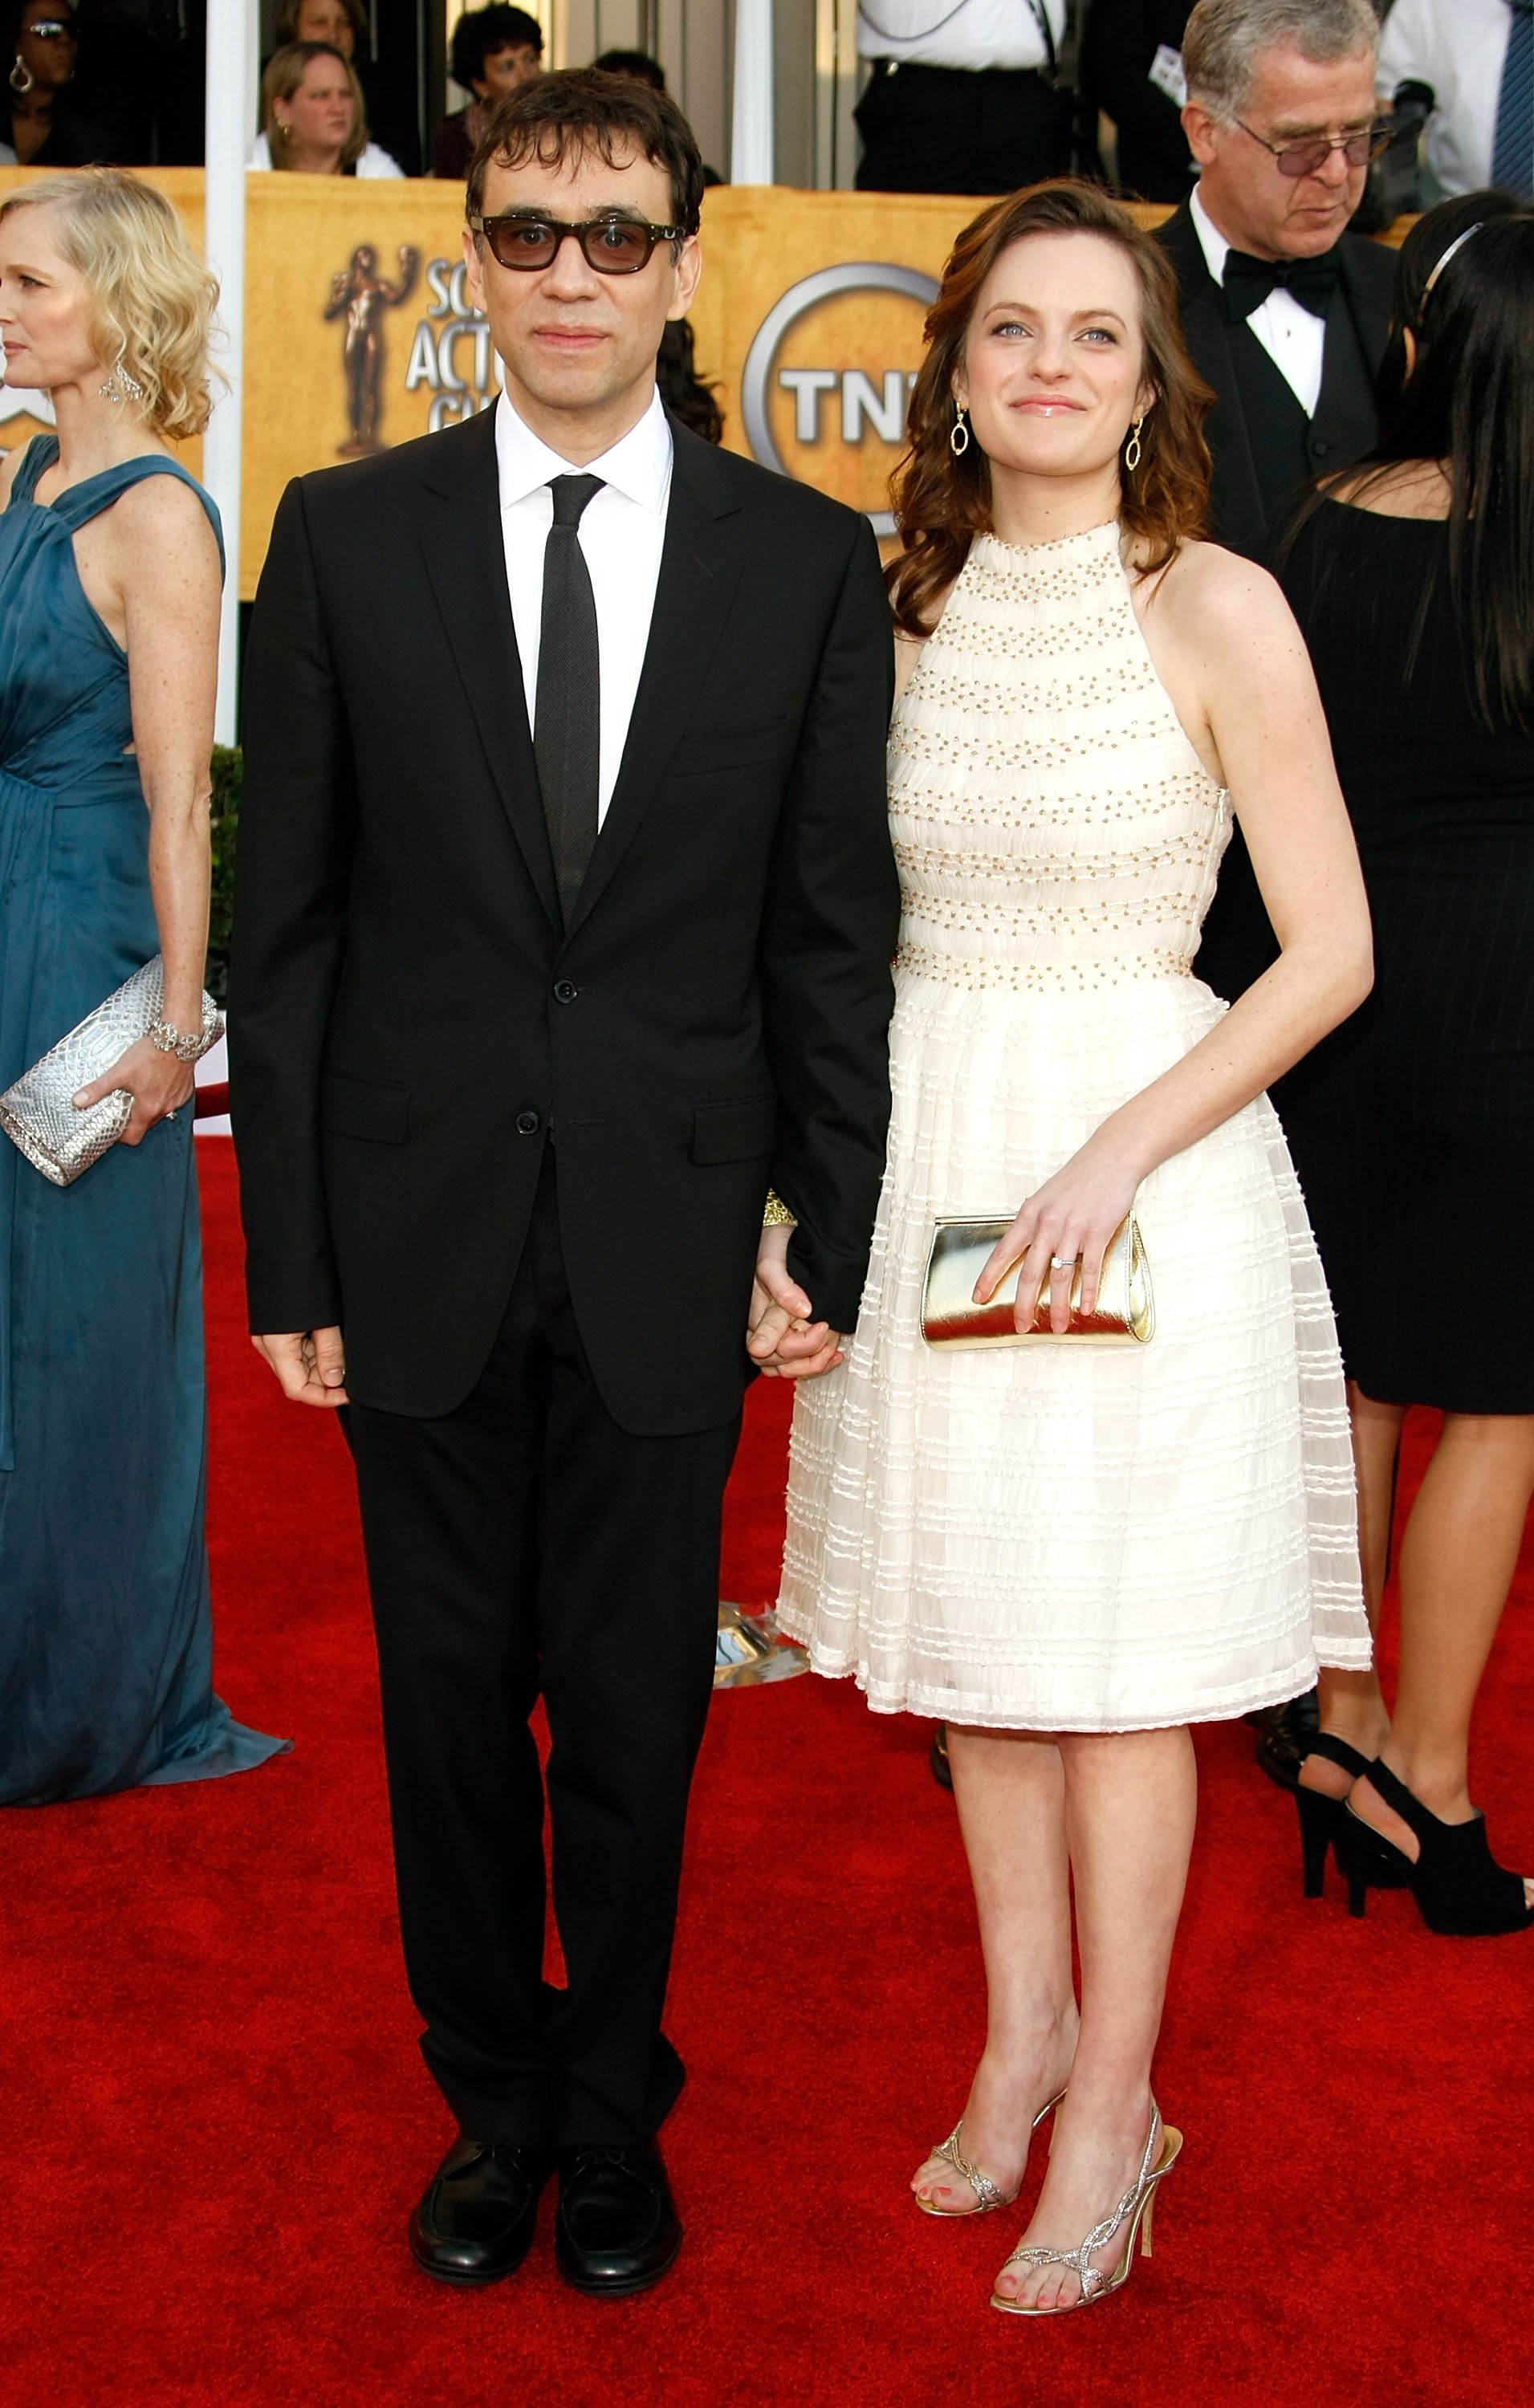 Actors Fred Armisen and Elisabeth Moss at the Shrine Auditorium on January 25, 2009, in Los Angeles, California. I Source: Getty Images